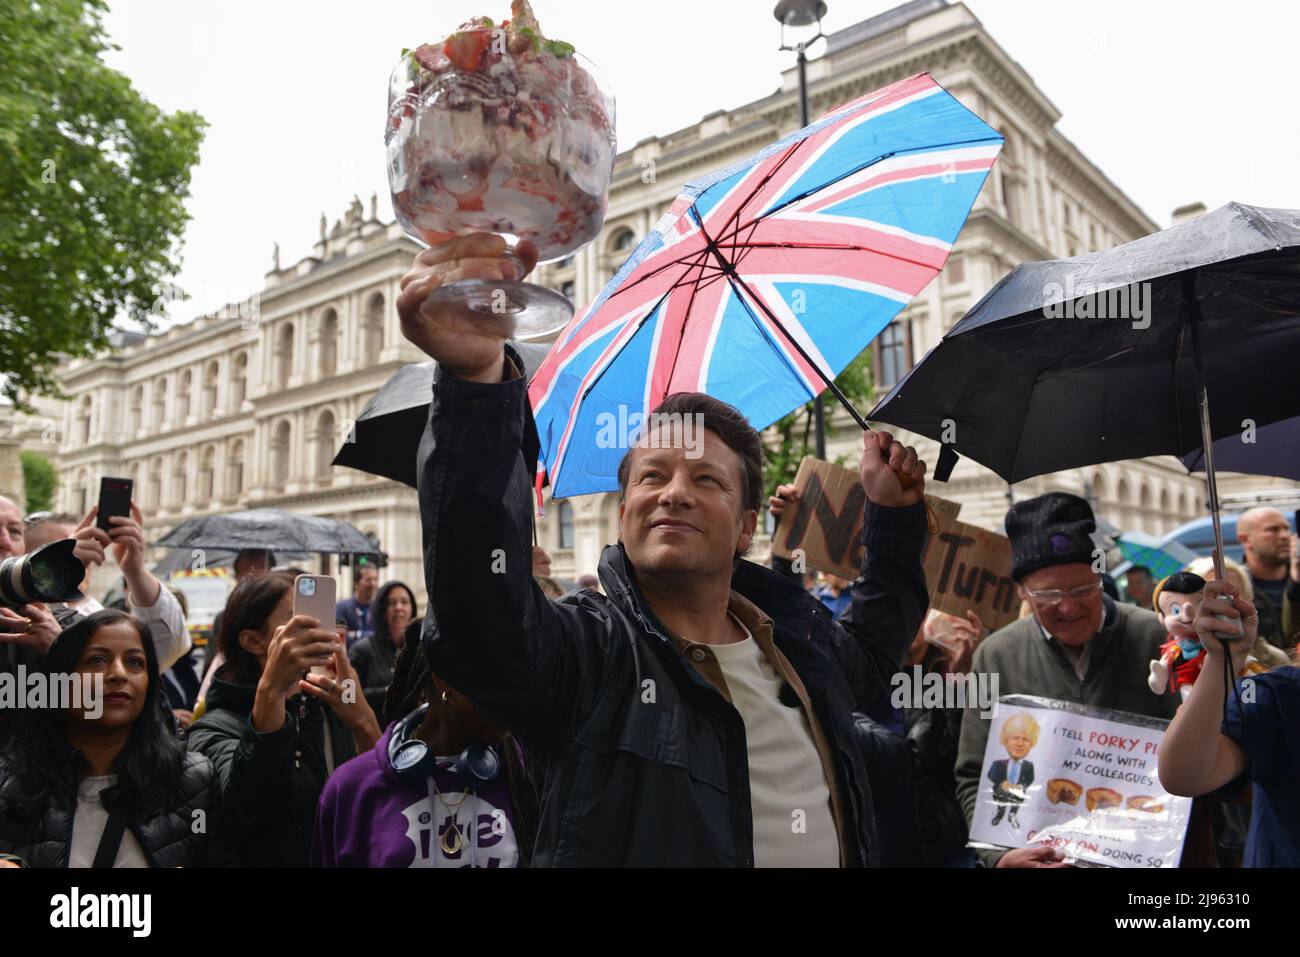 TV Chef JAMIE OLIVER protested in front of Downing Street, against government dropping an almost-implemented Obesity Law, which details banning deal promotions for unhealthy and junk foods,  as well as limiting their TV advertisements. The protest's name, 'Eton Mess', references a dessert believed to have originated from Boris Johnson's place of education, Eton College. Stock Photo